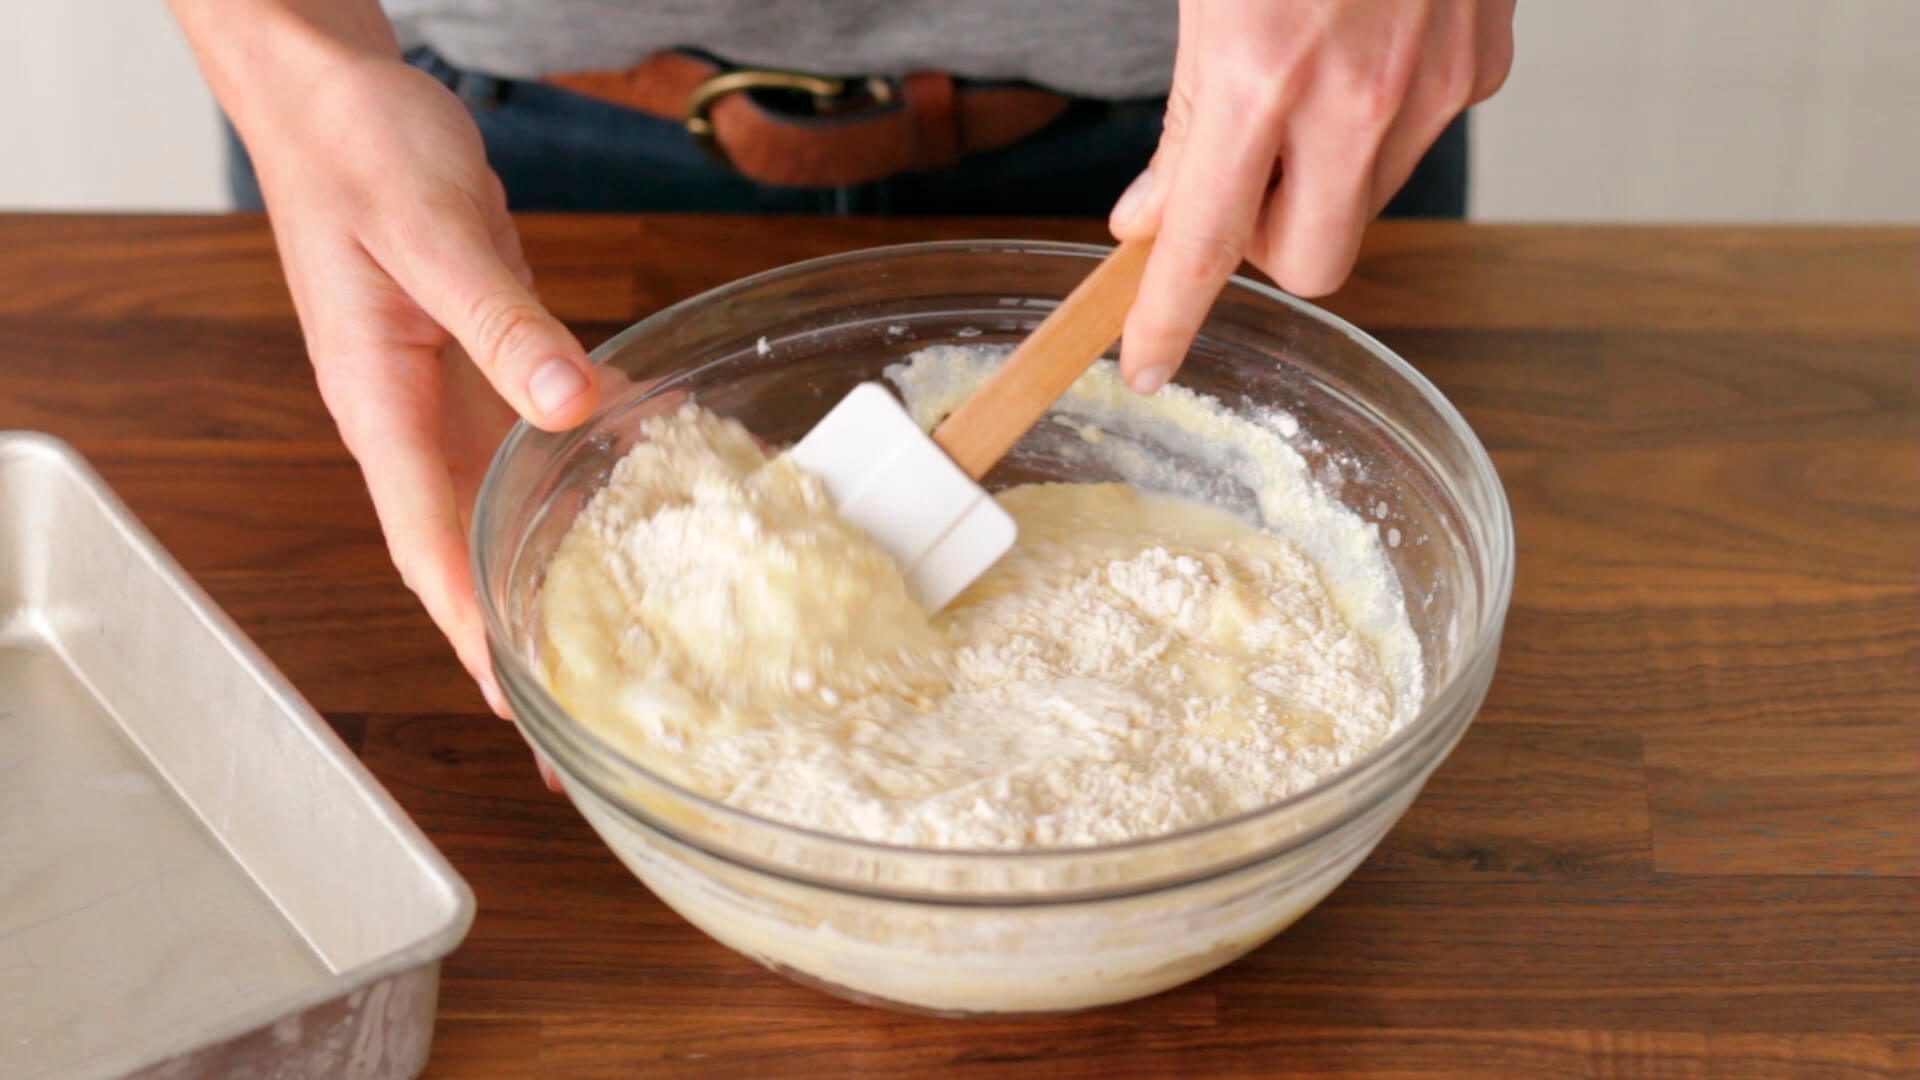 Person mixing ingredients in a bowl